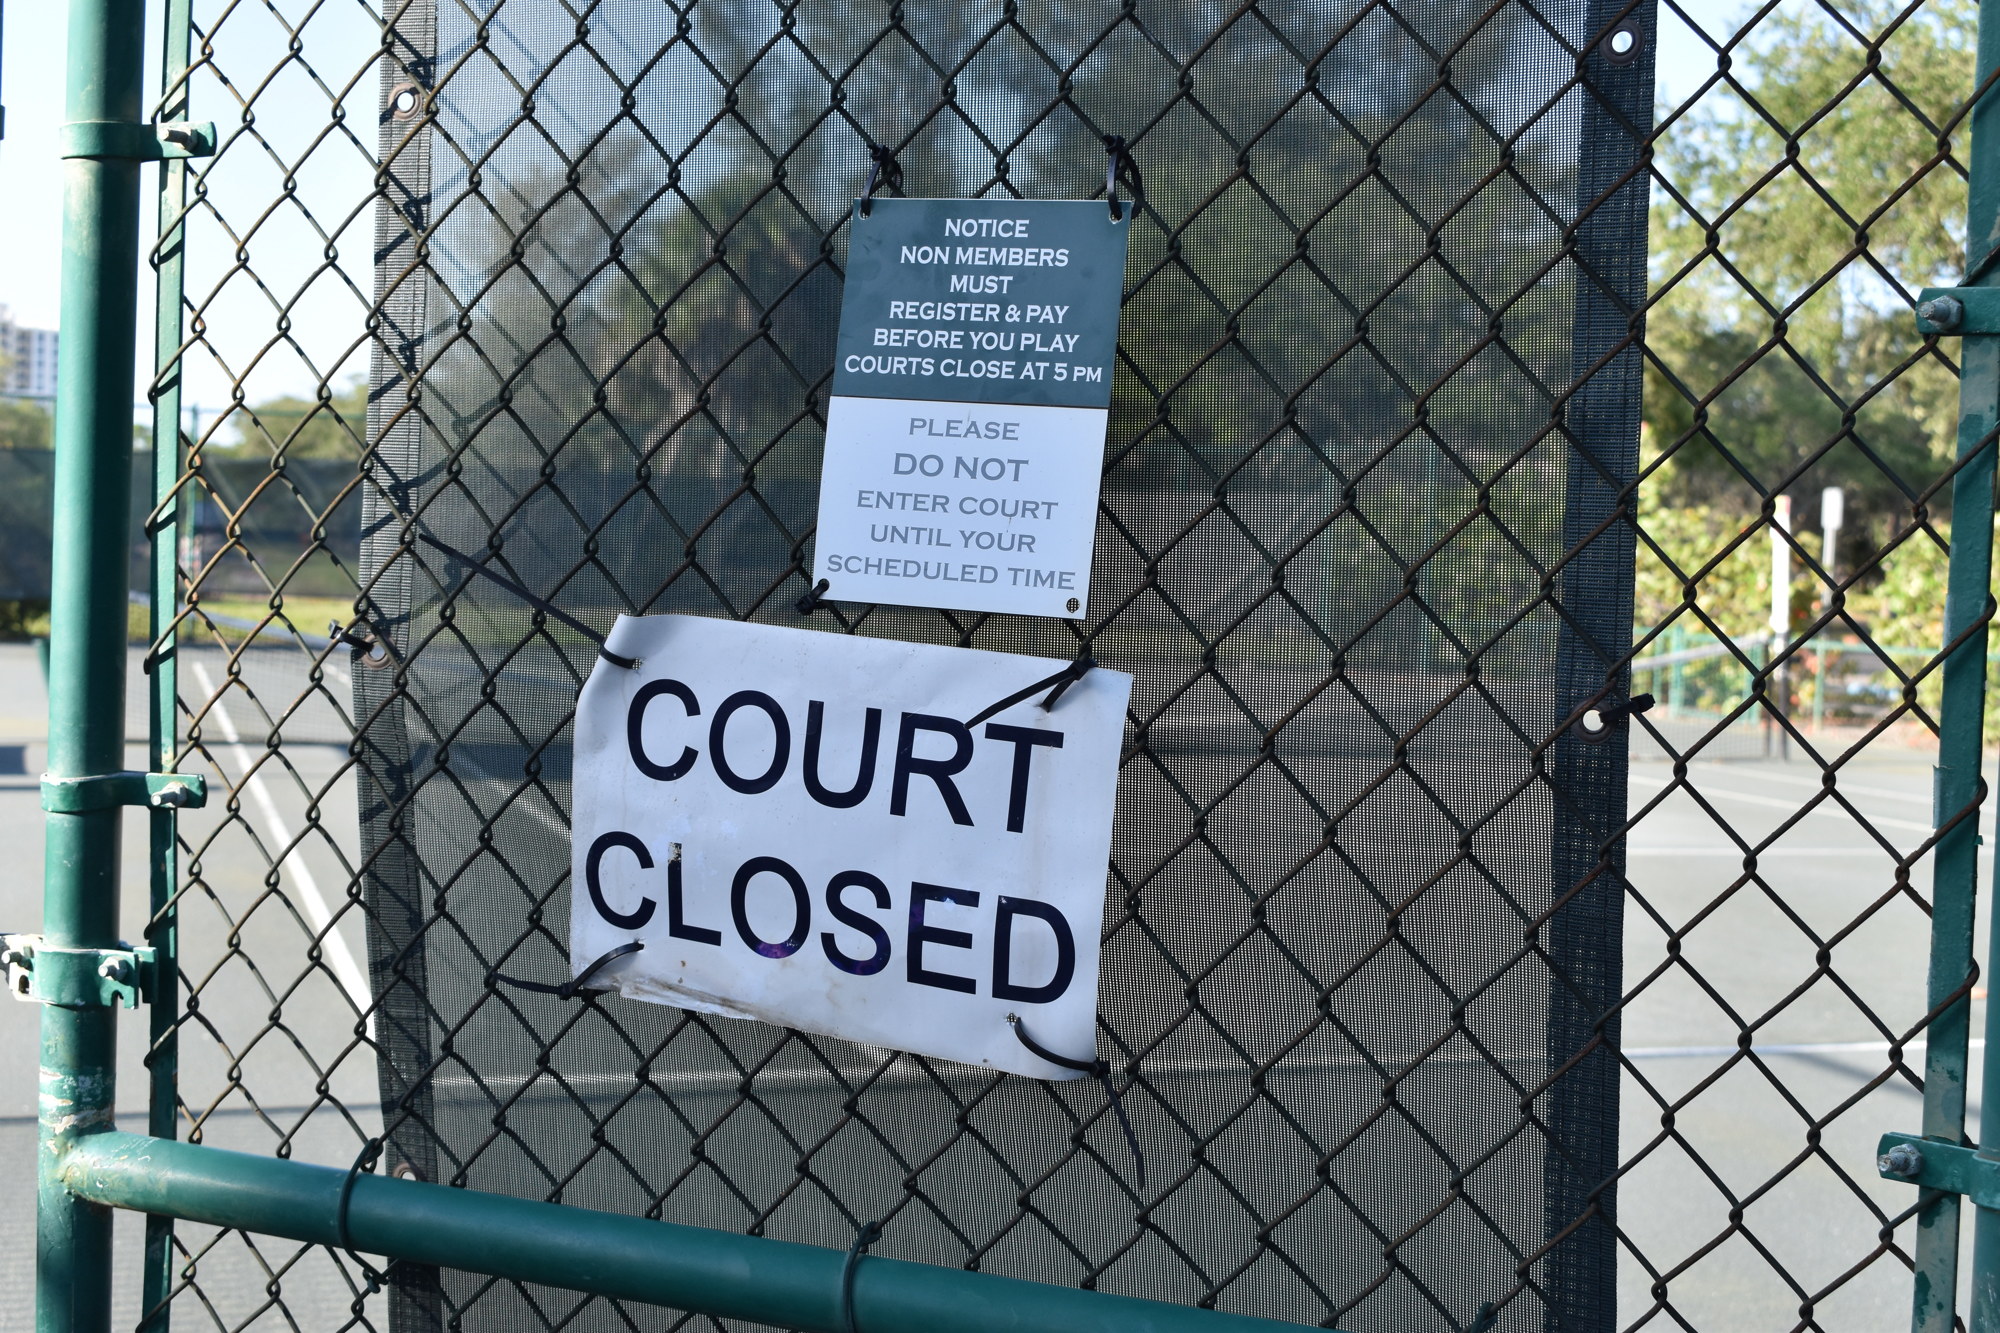 The courts at the Longboat Key Tennis Center have been closed since March 22 aside from some maintenance work. 